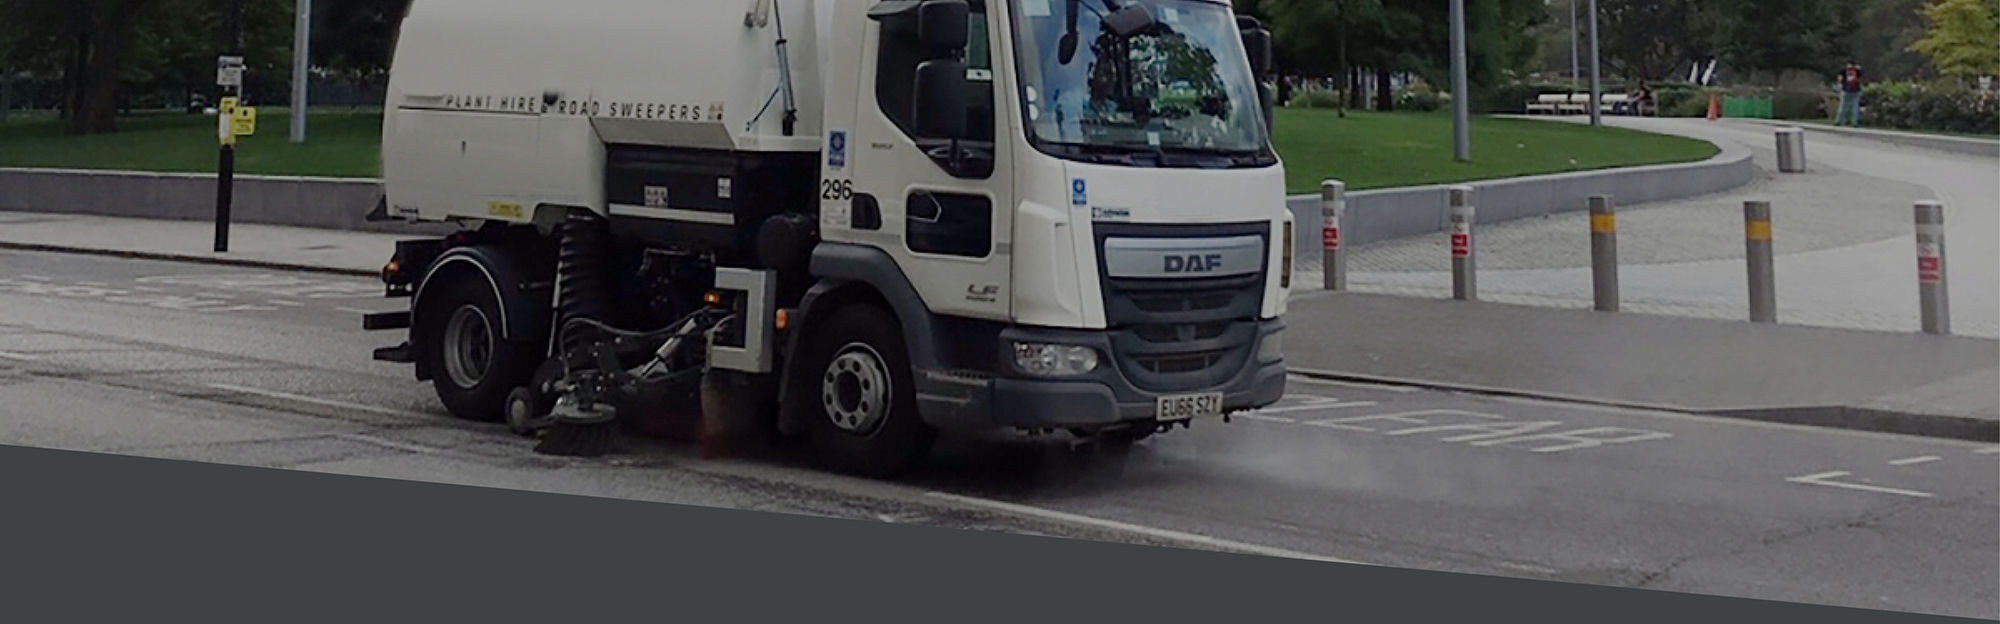 Artemes Waste Solutions - Road Sweepers